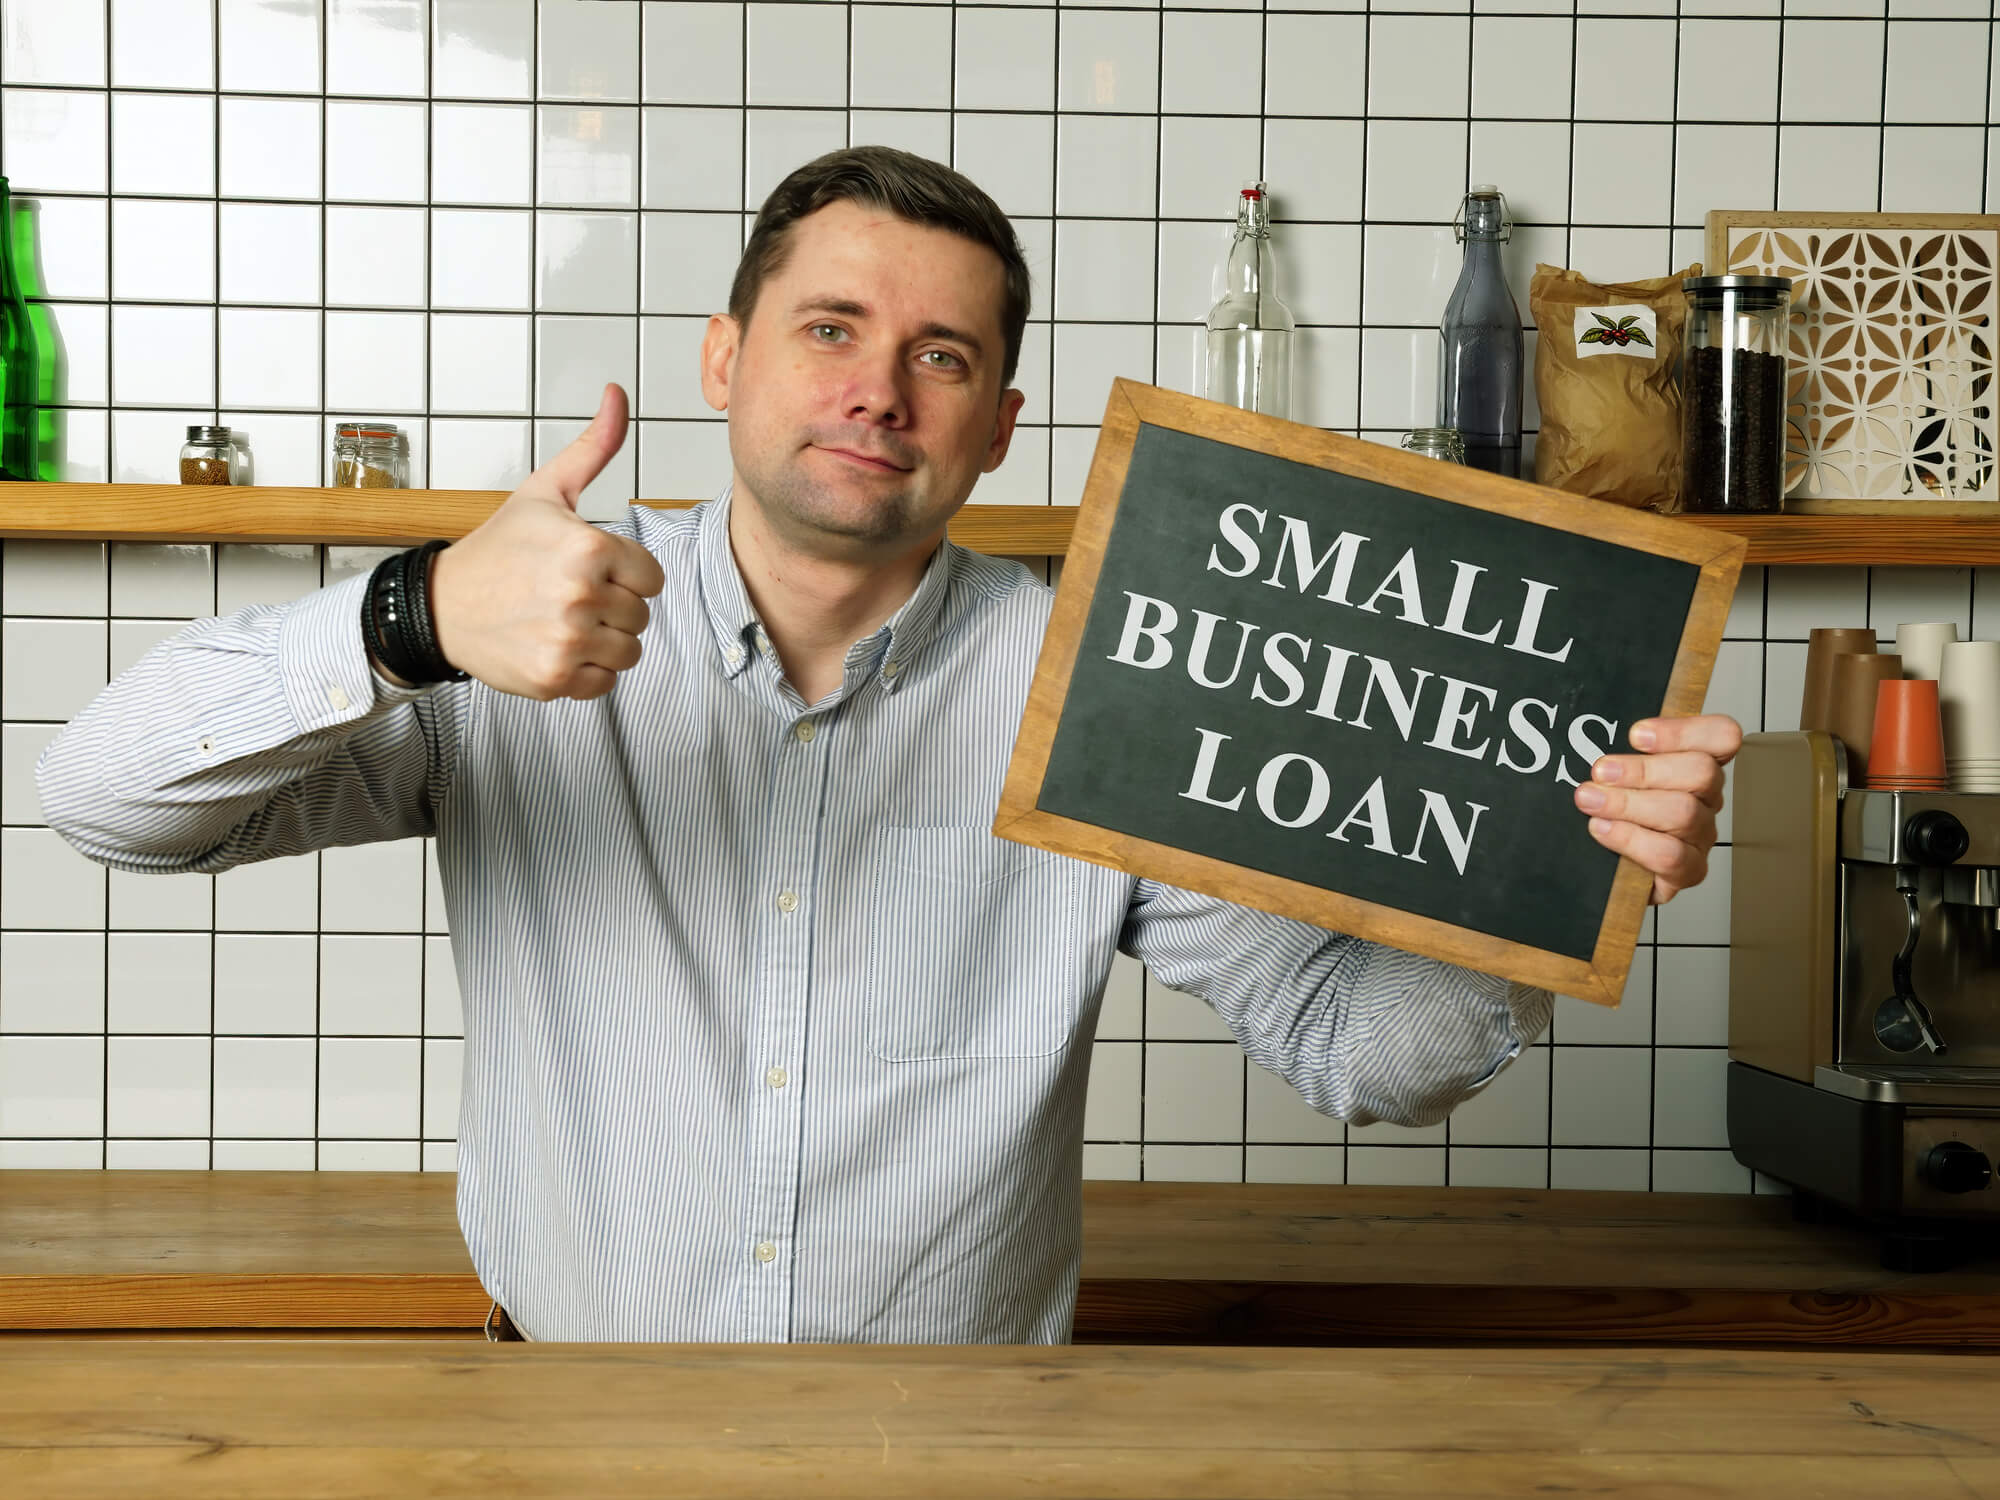 SMALL BUSINESS LOANS - Complete Controller